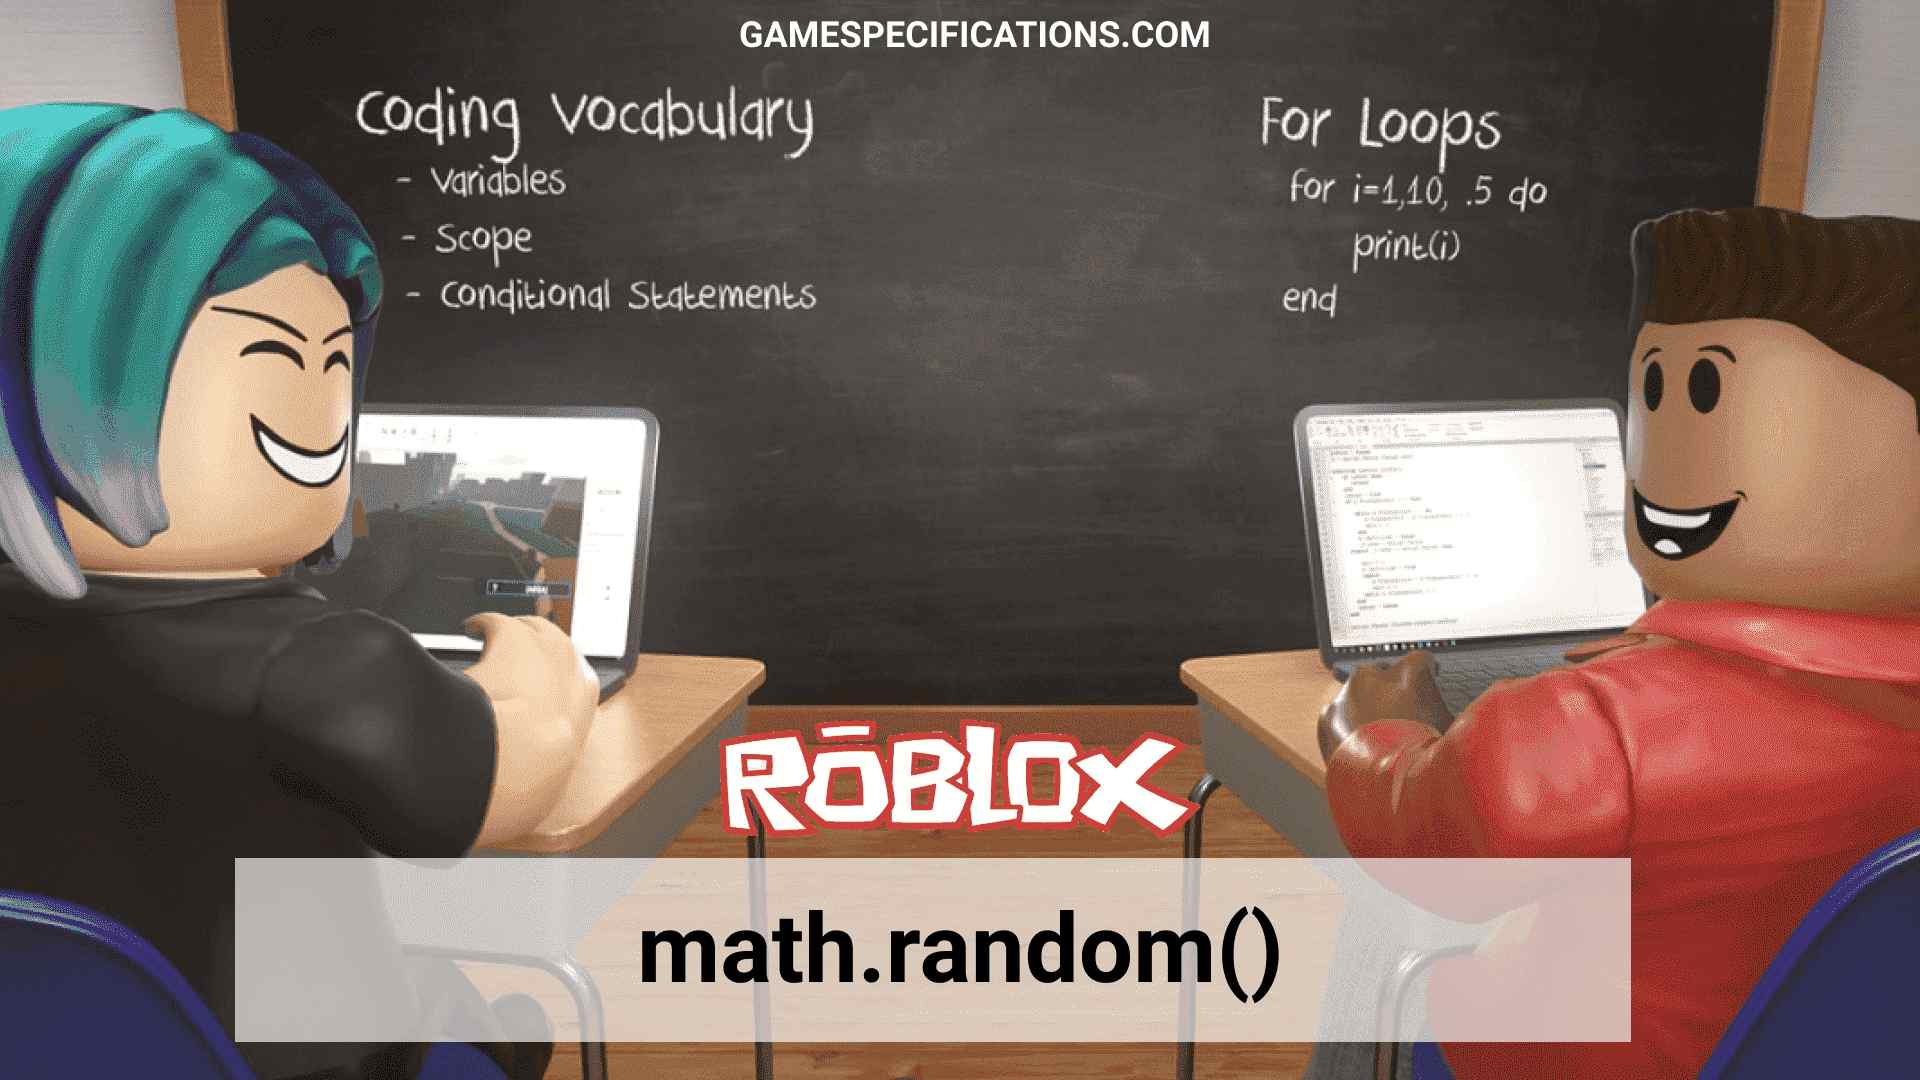 Roblox Math Random How To Use Math Random Efficiently In Roblox Game Specifications - roblox local variable